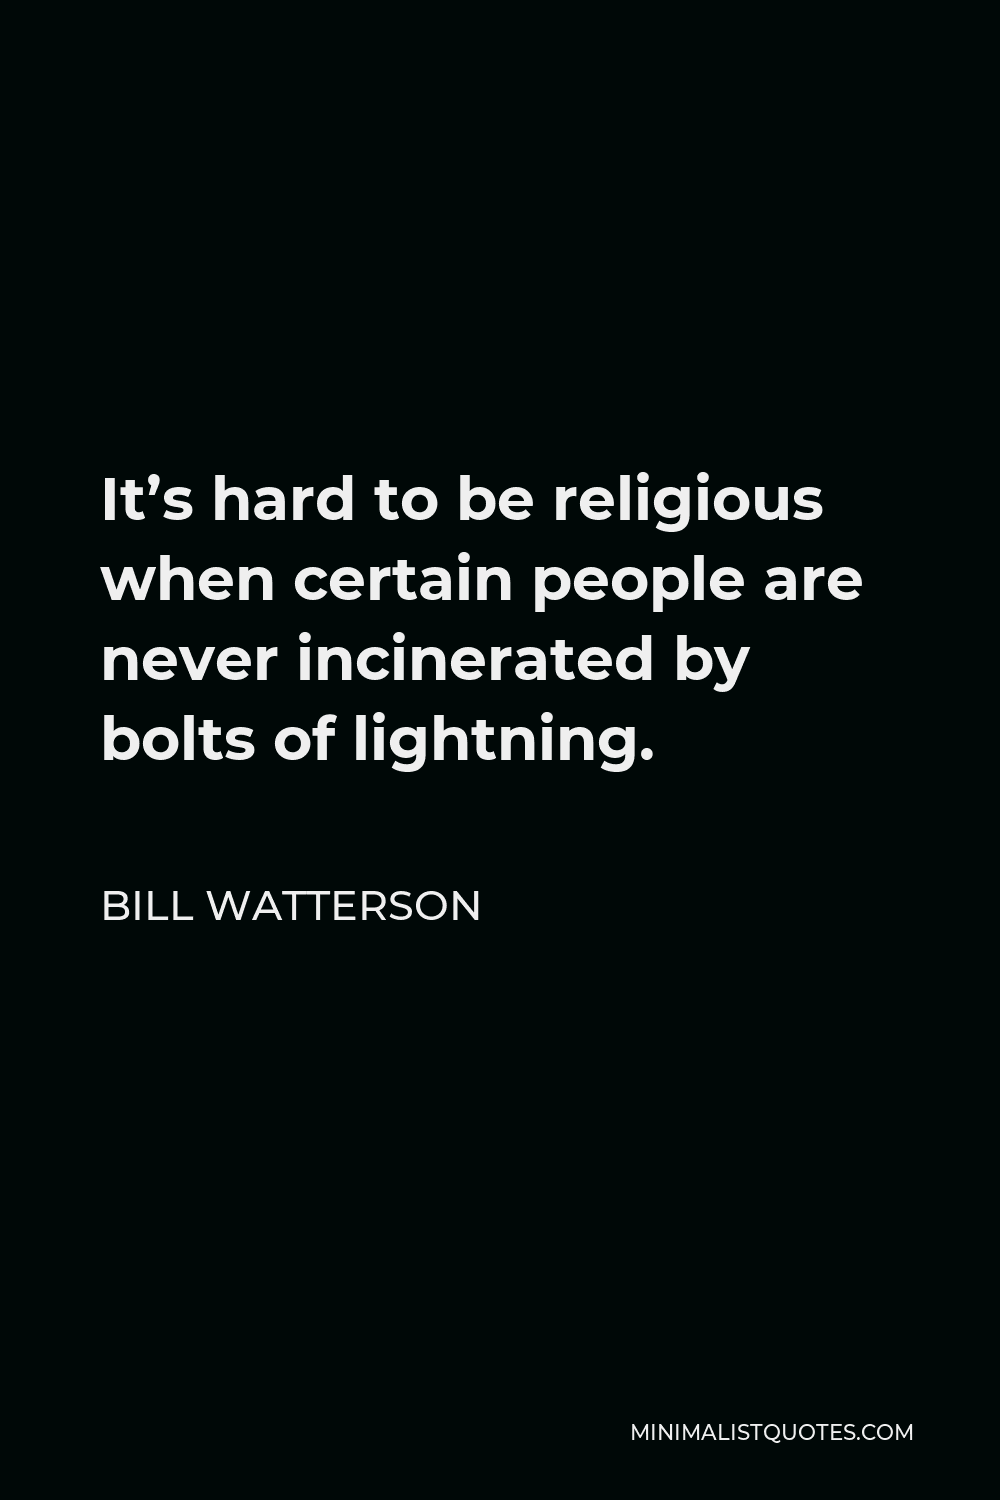 Bill Watterson Quote - It’s hard to be religious when certain people are never incinerated by bolts of lightning.